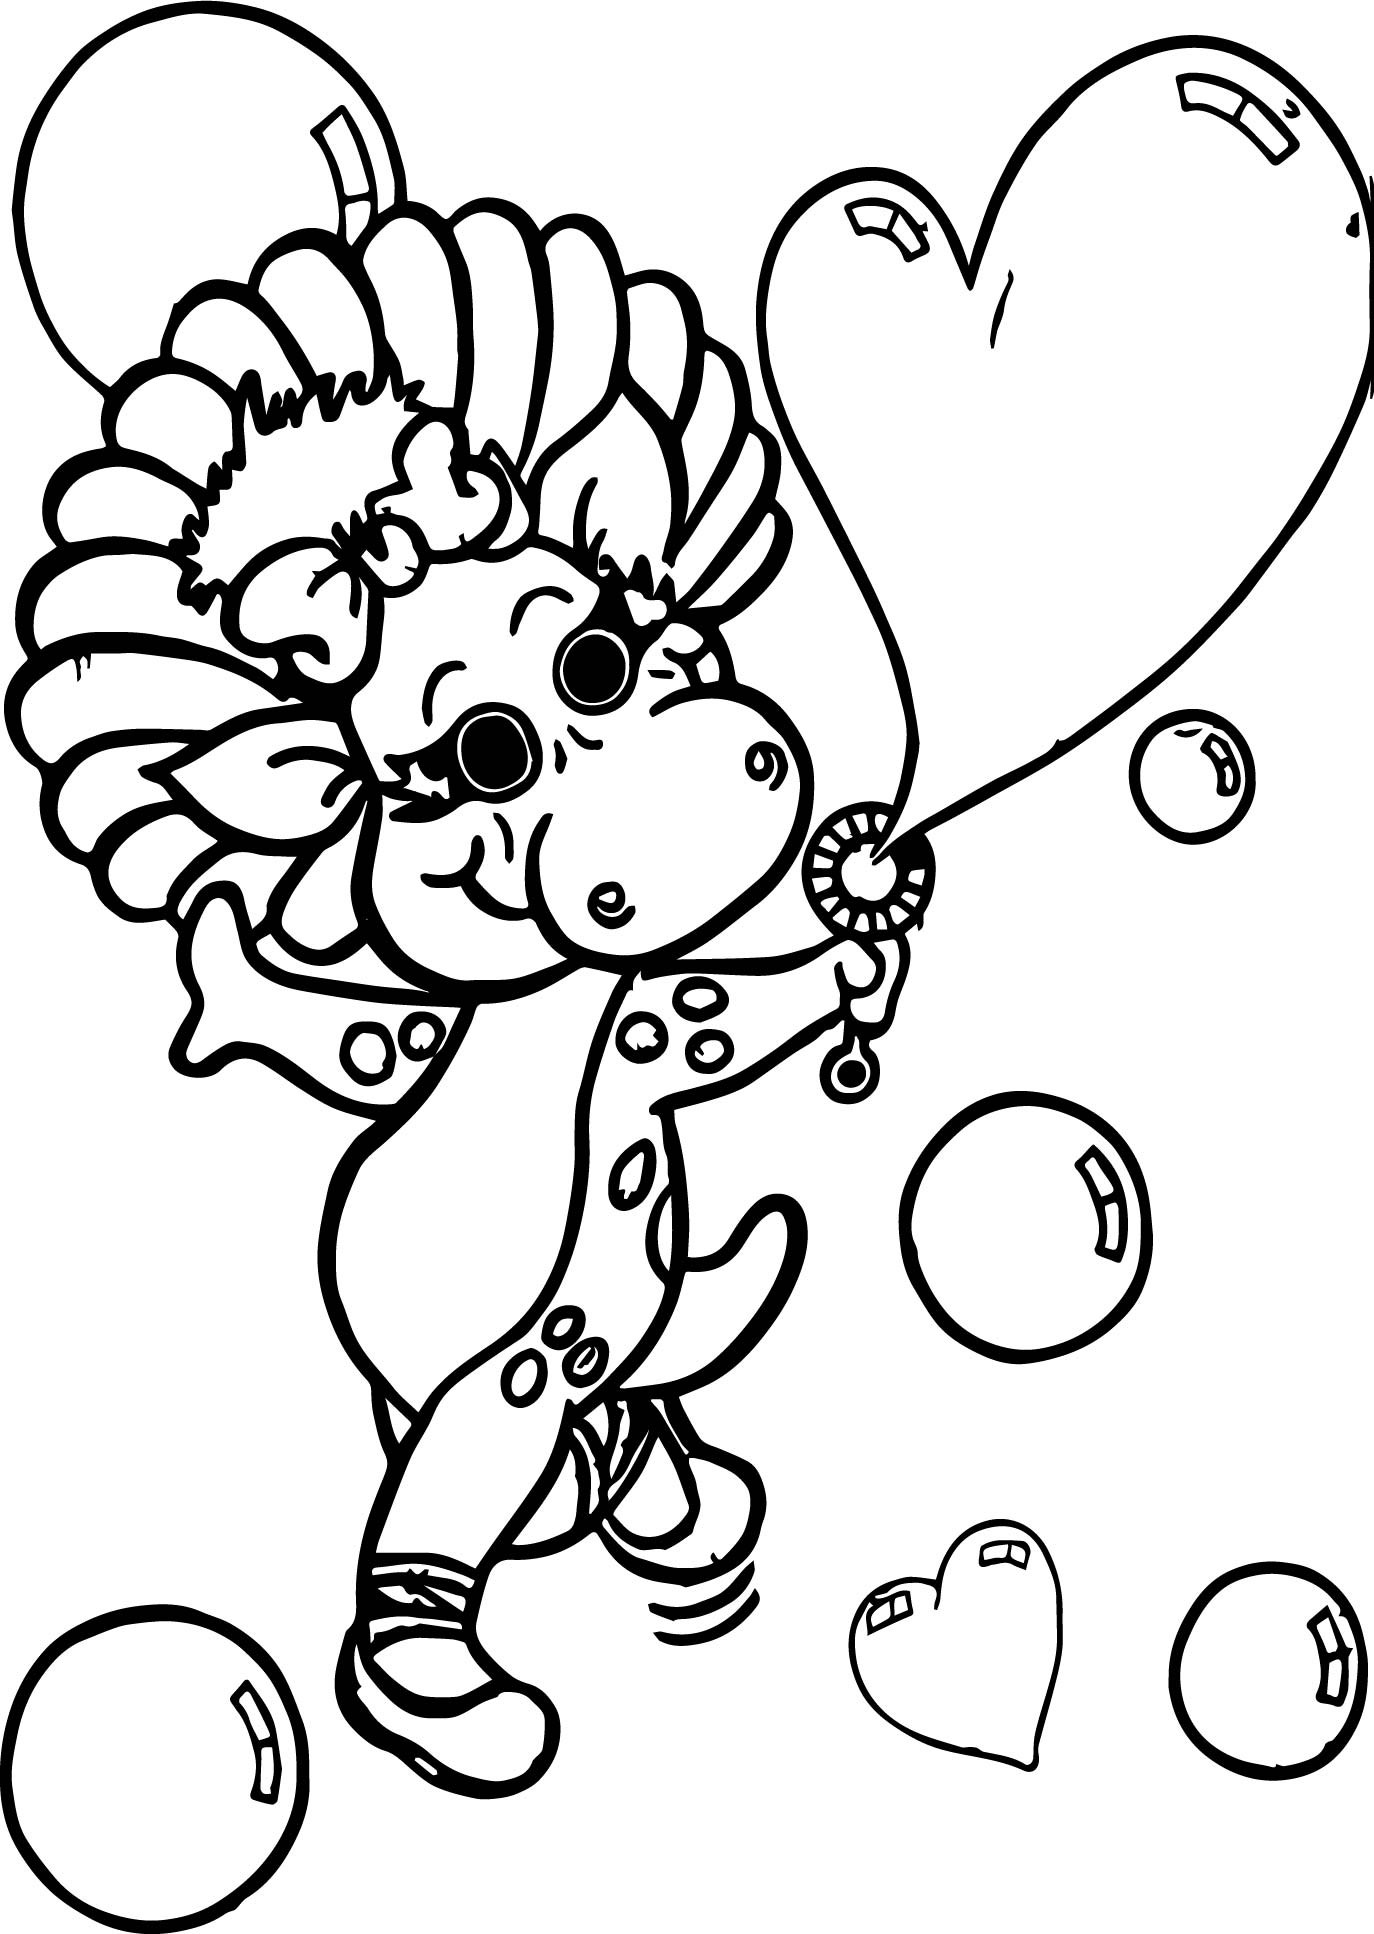 Baby Bop Coloring Pages
 Baby Bop Blows Bubbles Coloring Page